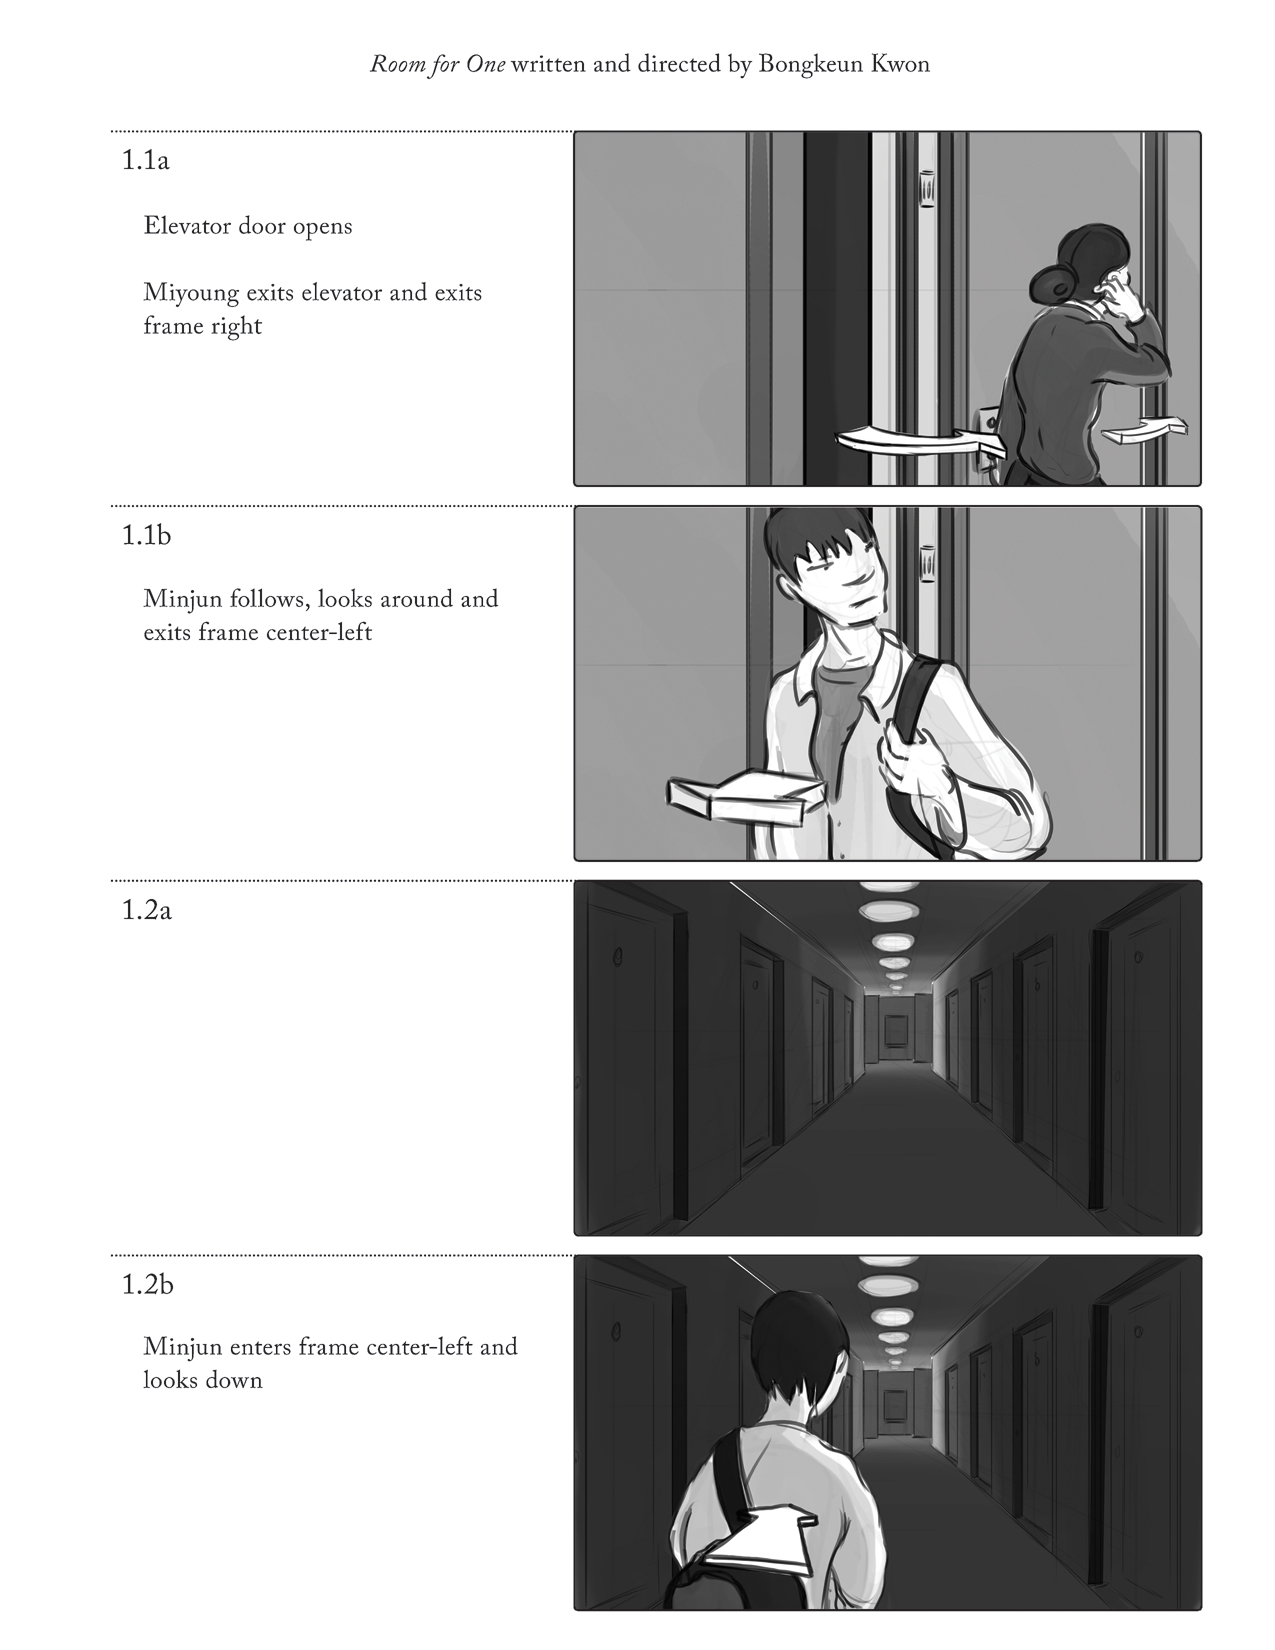 All-live-action-storyboards-with-new-vertical-format-1